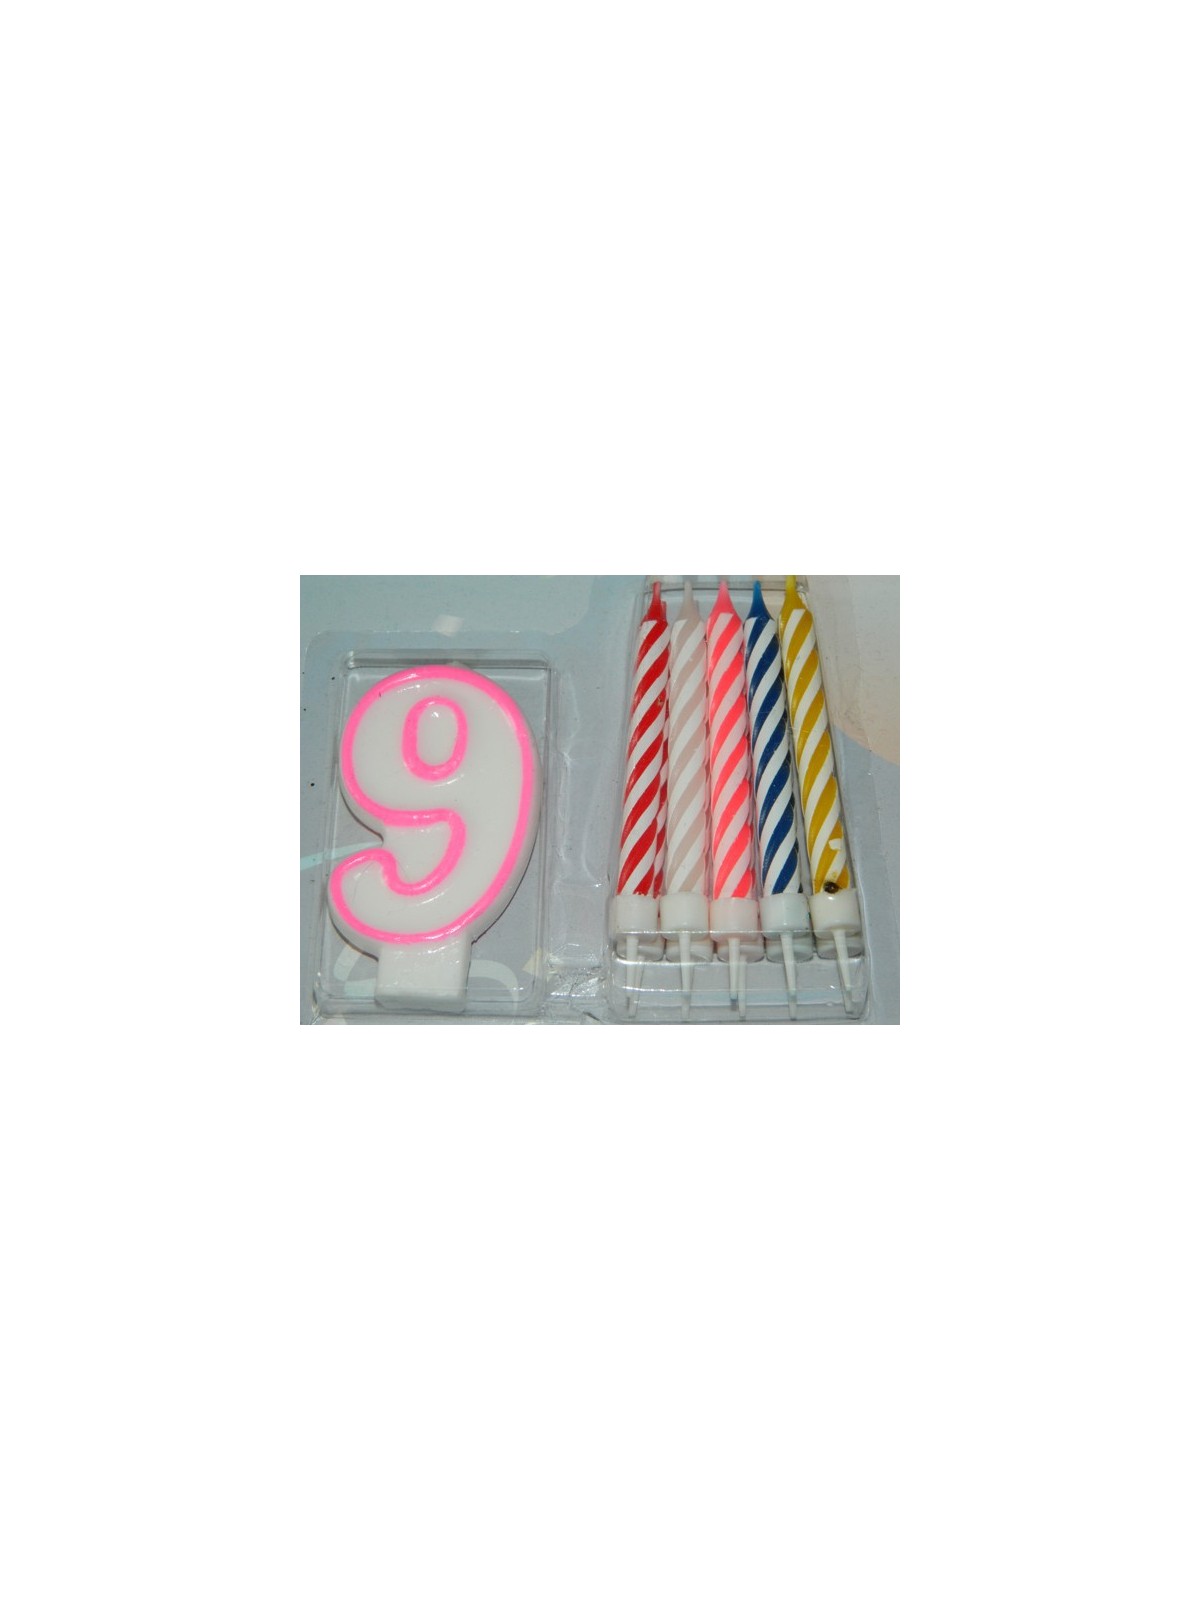 Cake candles - 9 + 10 candles